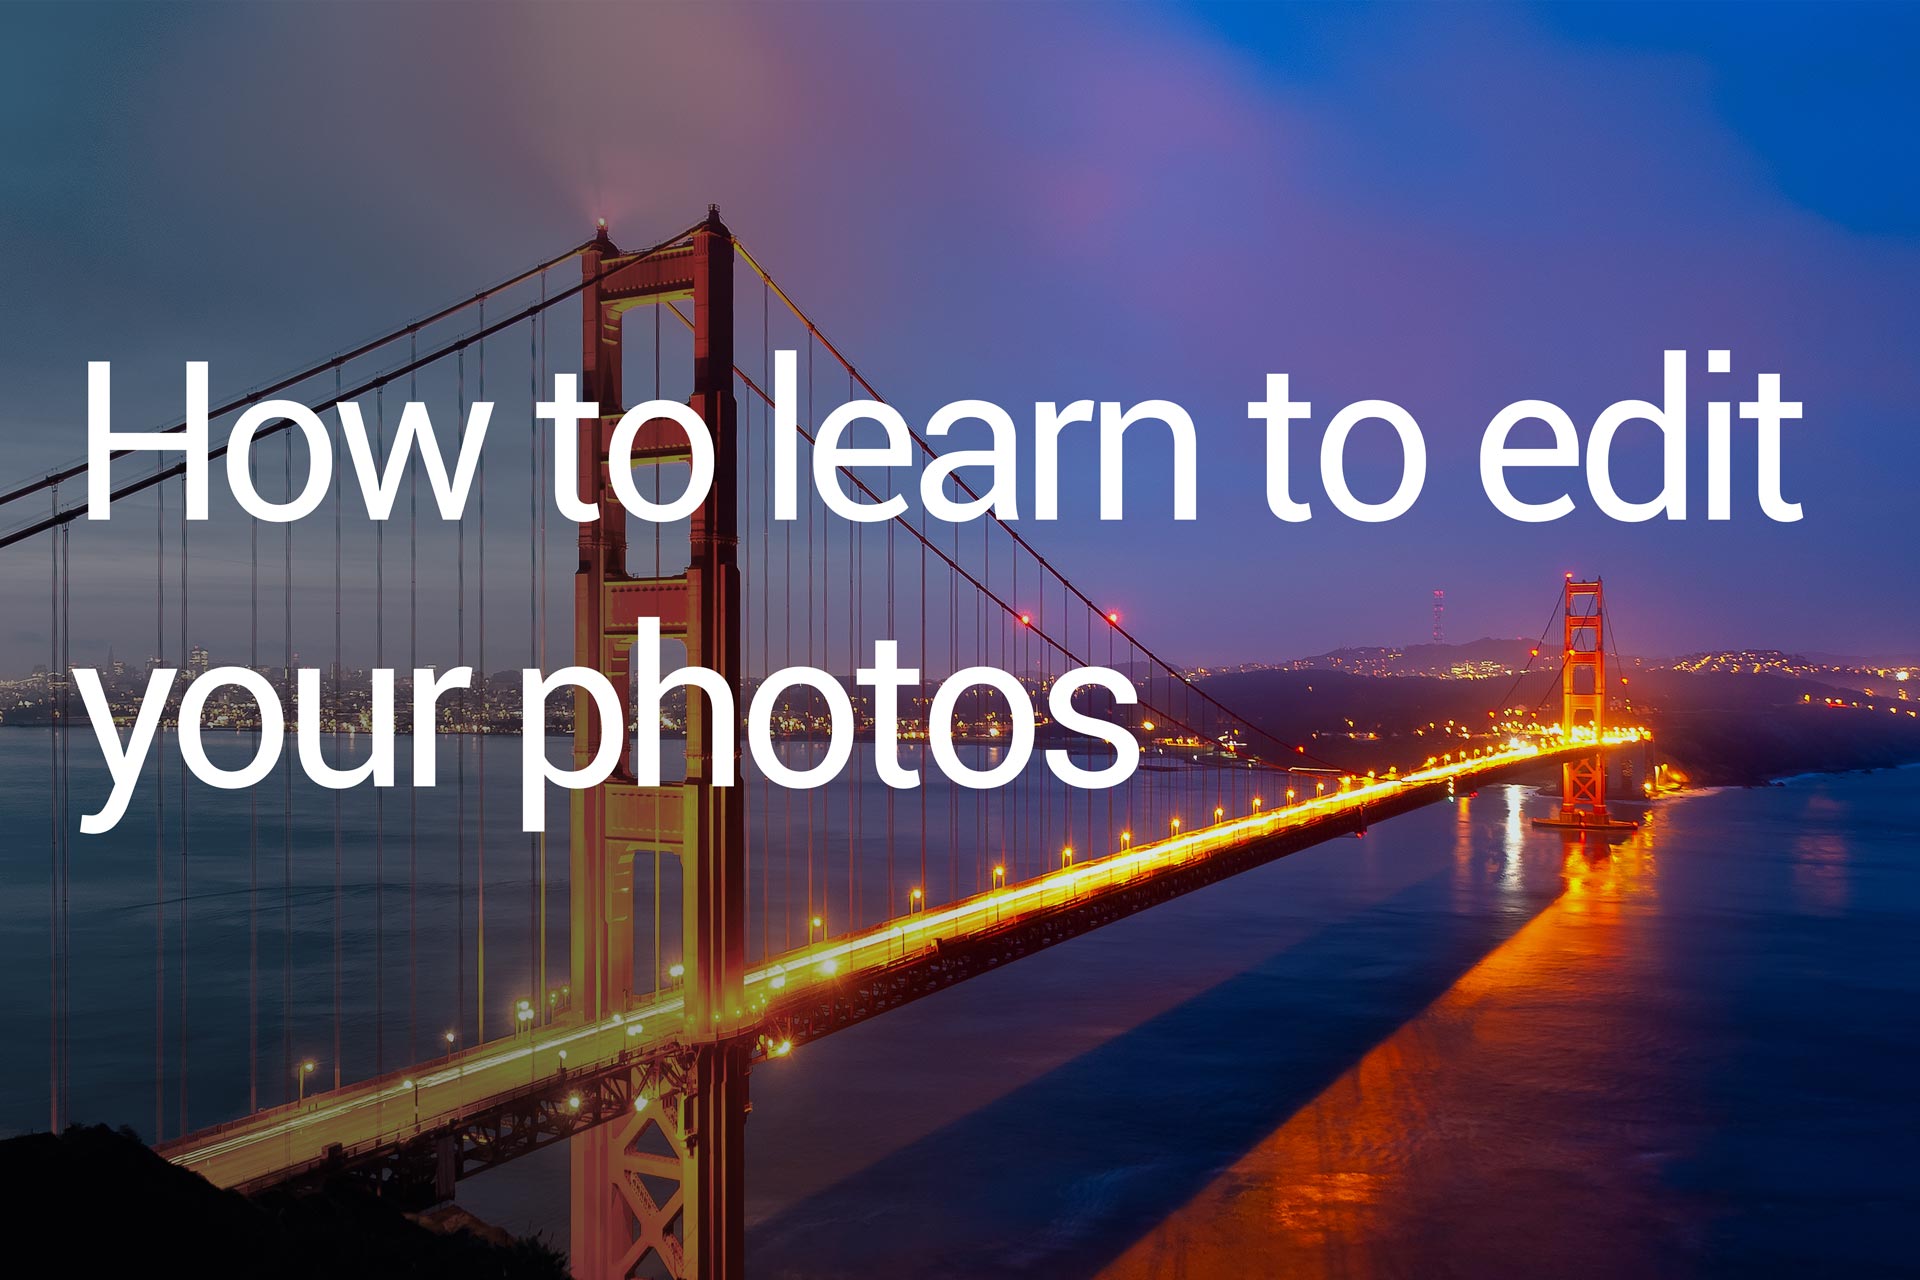 How to learn to edit your photos